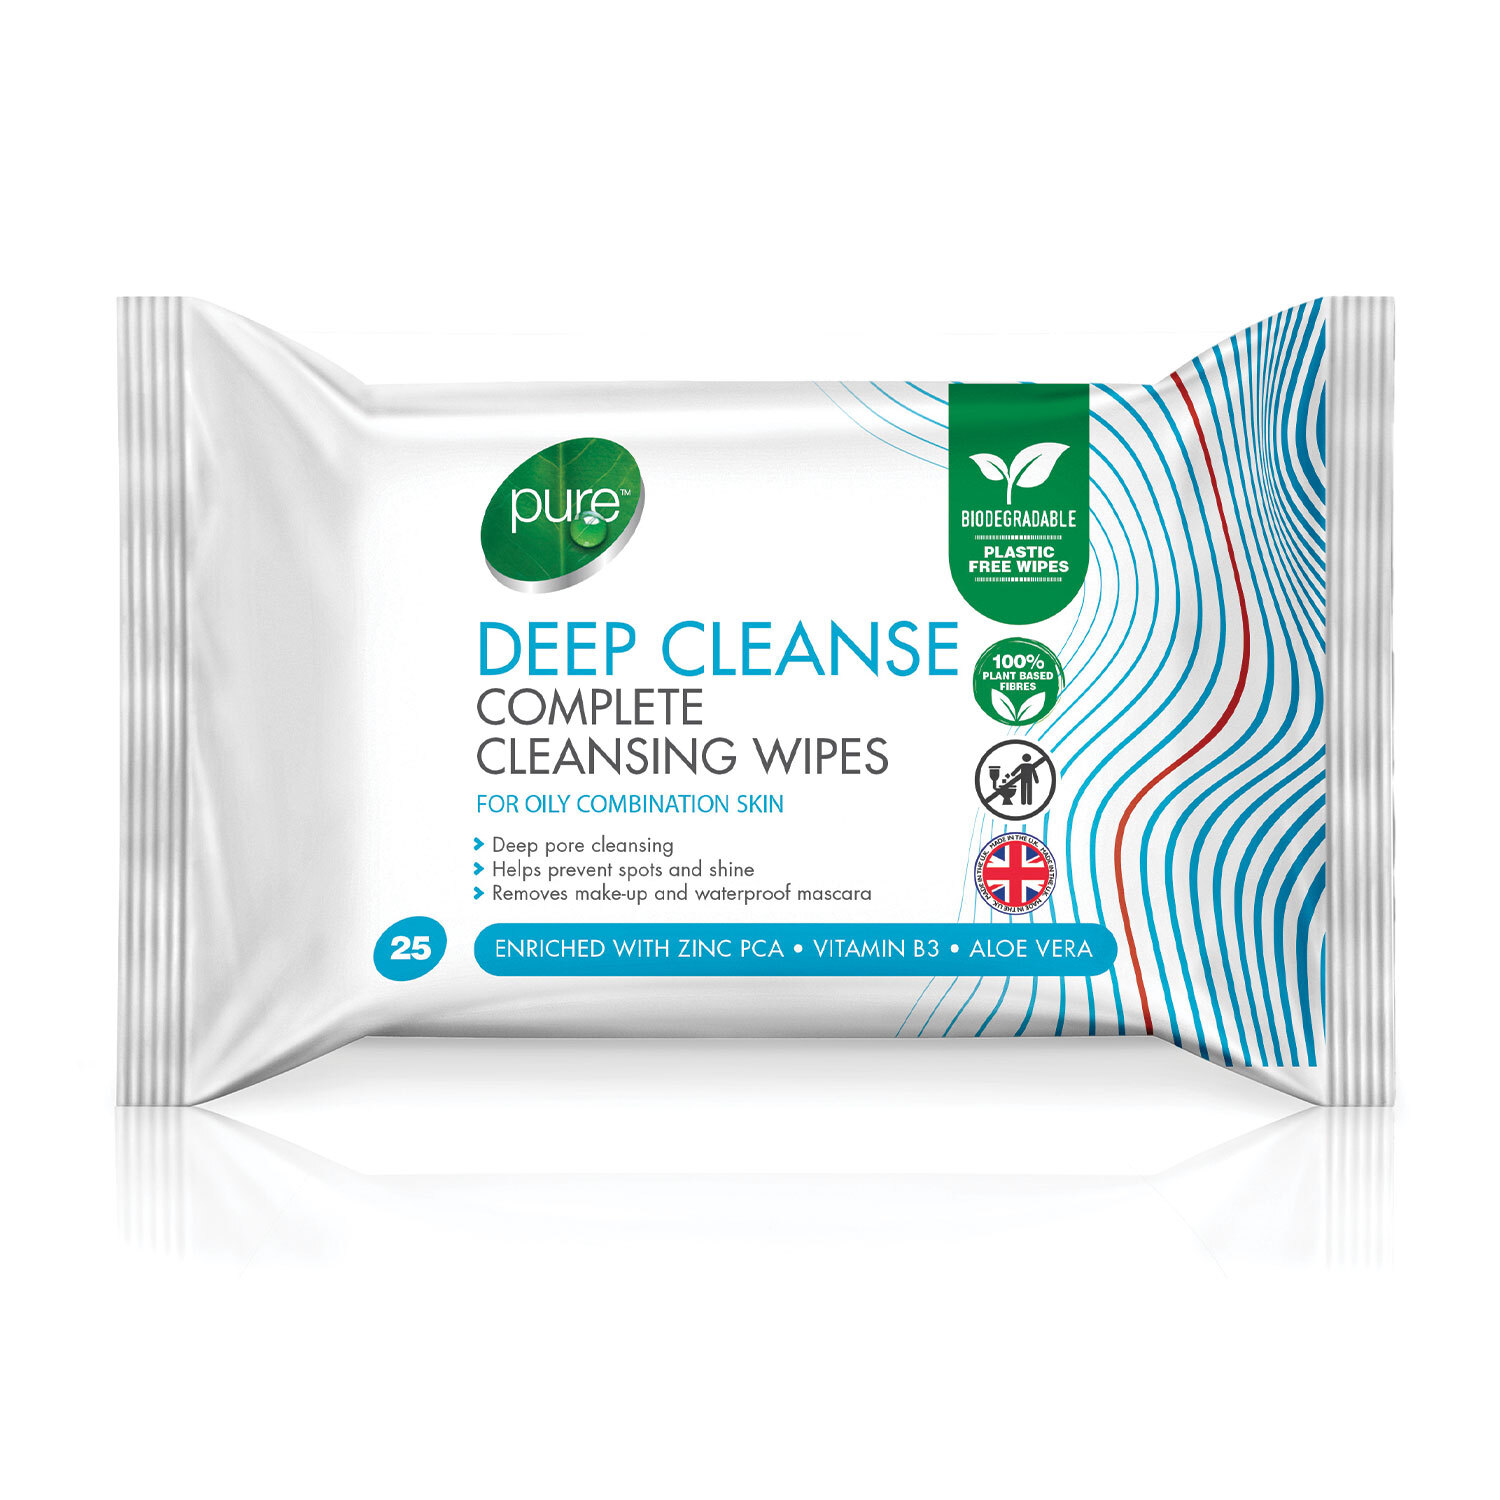 Pure Deep Cleanse Complete Cleansing Wipes Image